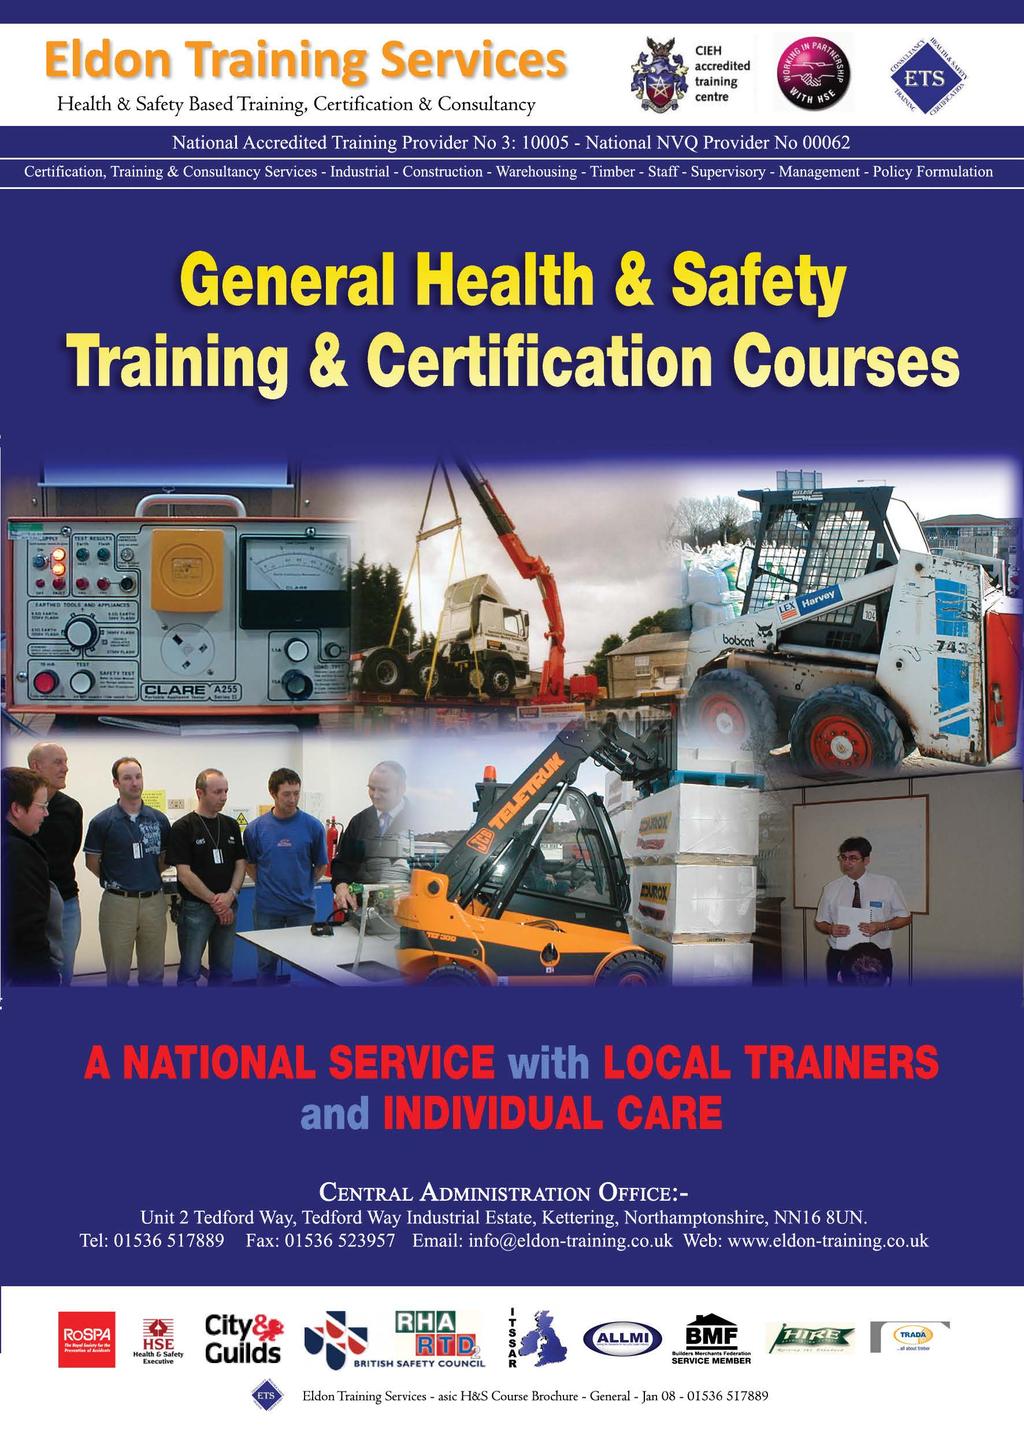 Health & Safety Certification & Services Ltd Central Administration Office - 100 Princes Street, Kettering, Northamptonshire, NN16 8RR Tel: 01536 414966 Fax: 01536 416933 email: info@hscsltd.co.